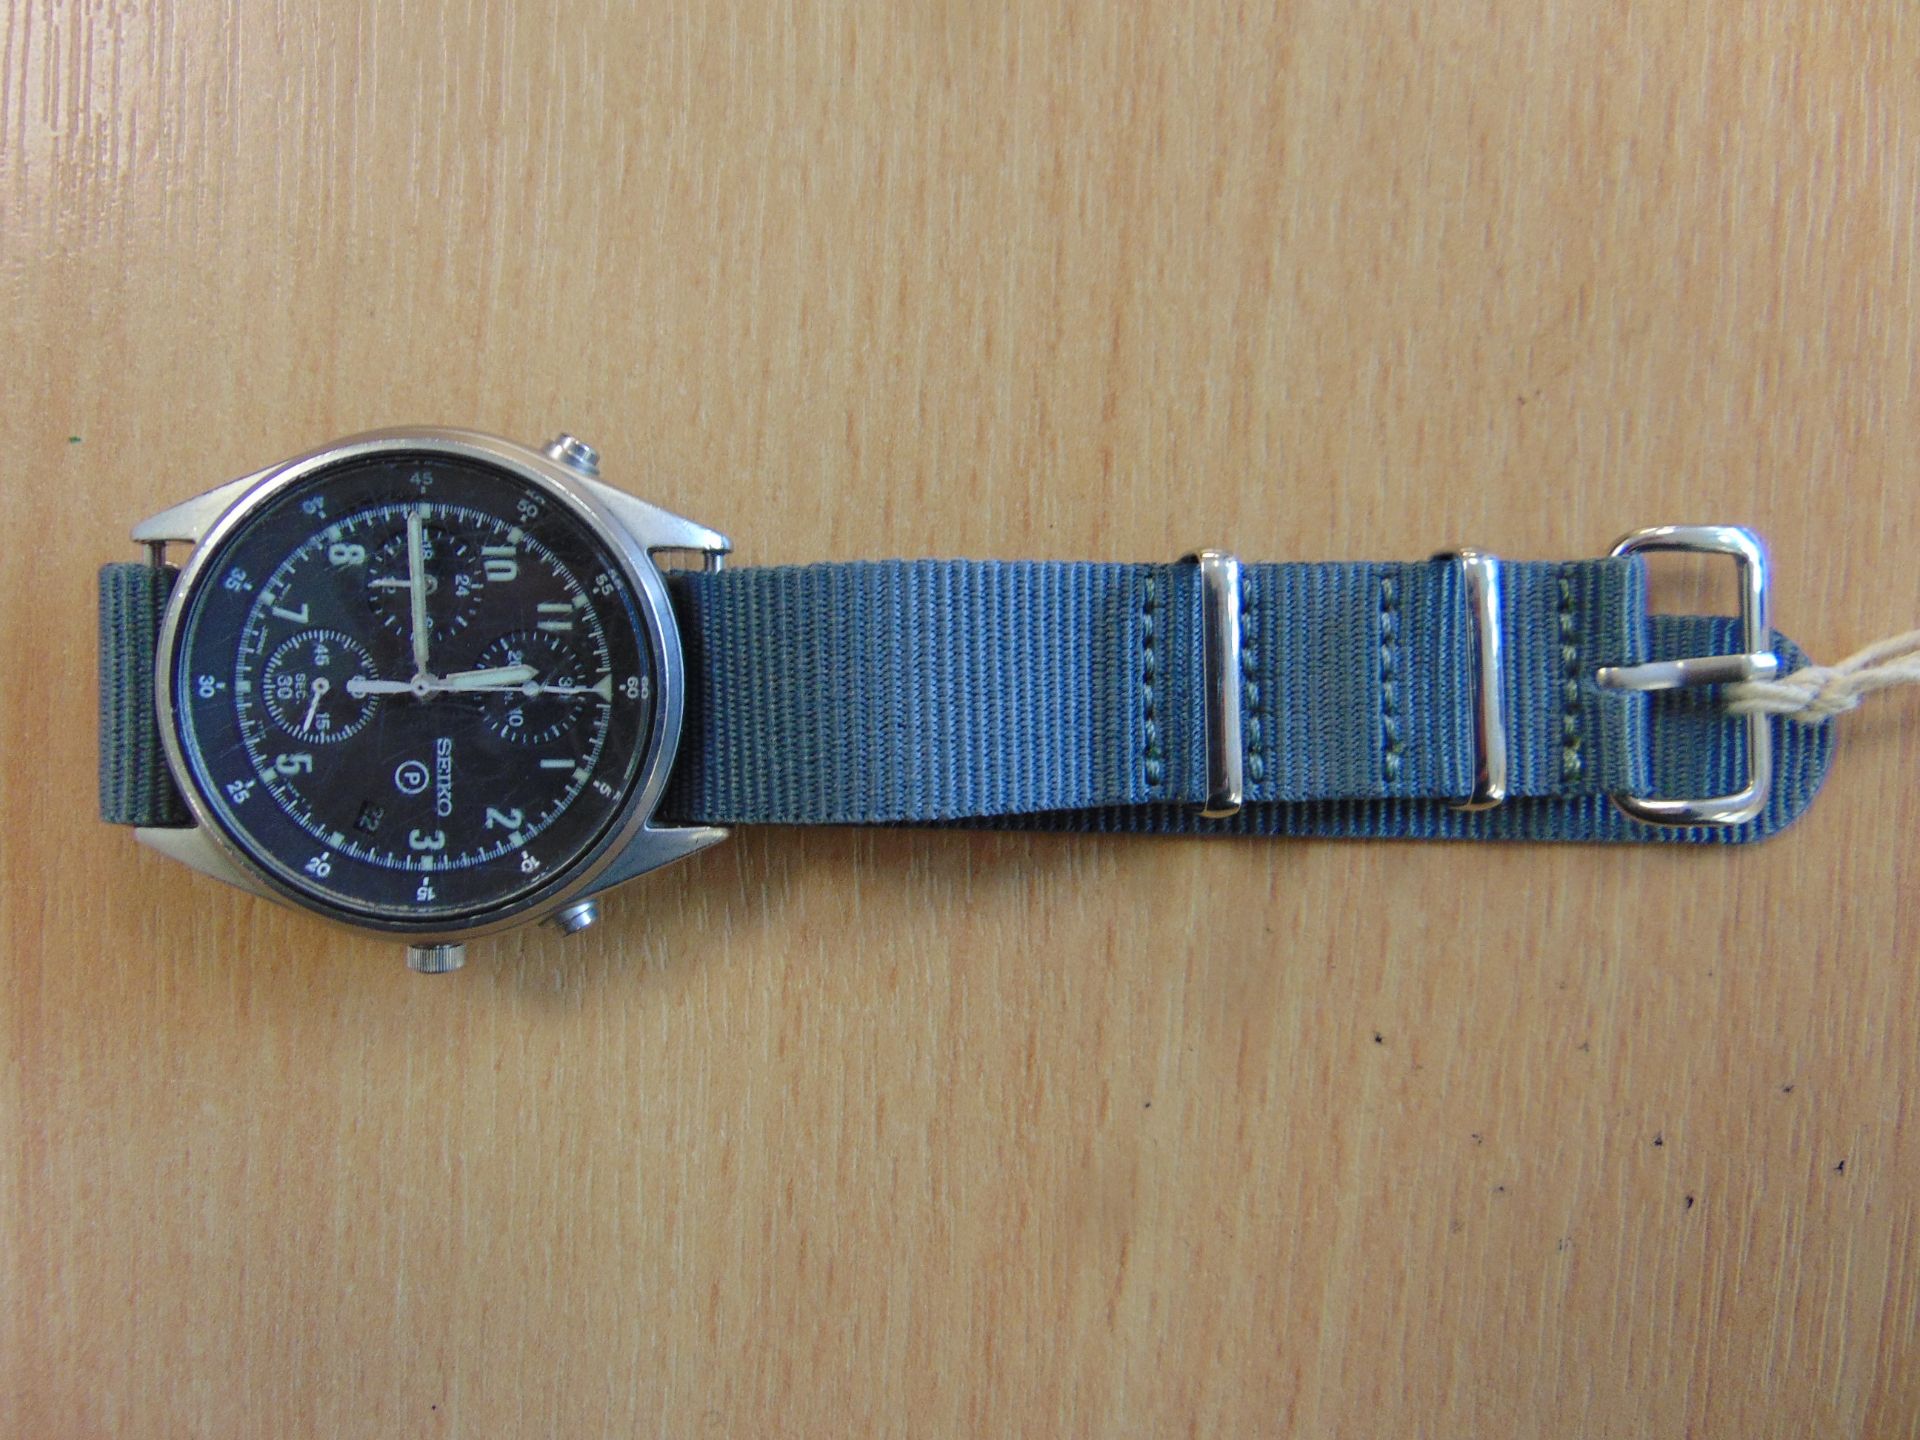 SEIKO RAF ISSUE PILOTS CHRONO GEN 2 WATCH NATO MARKED DATED 1996 - NEW BATTERY AND STRAP - Image 2 of 11